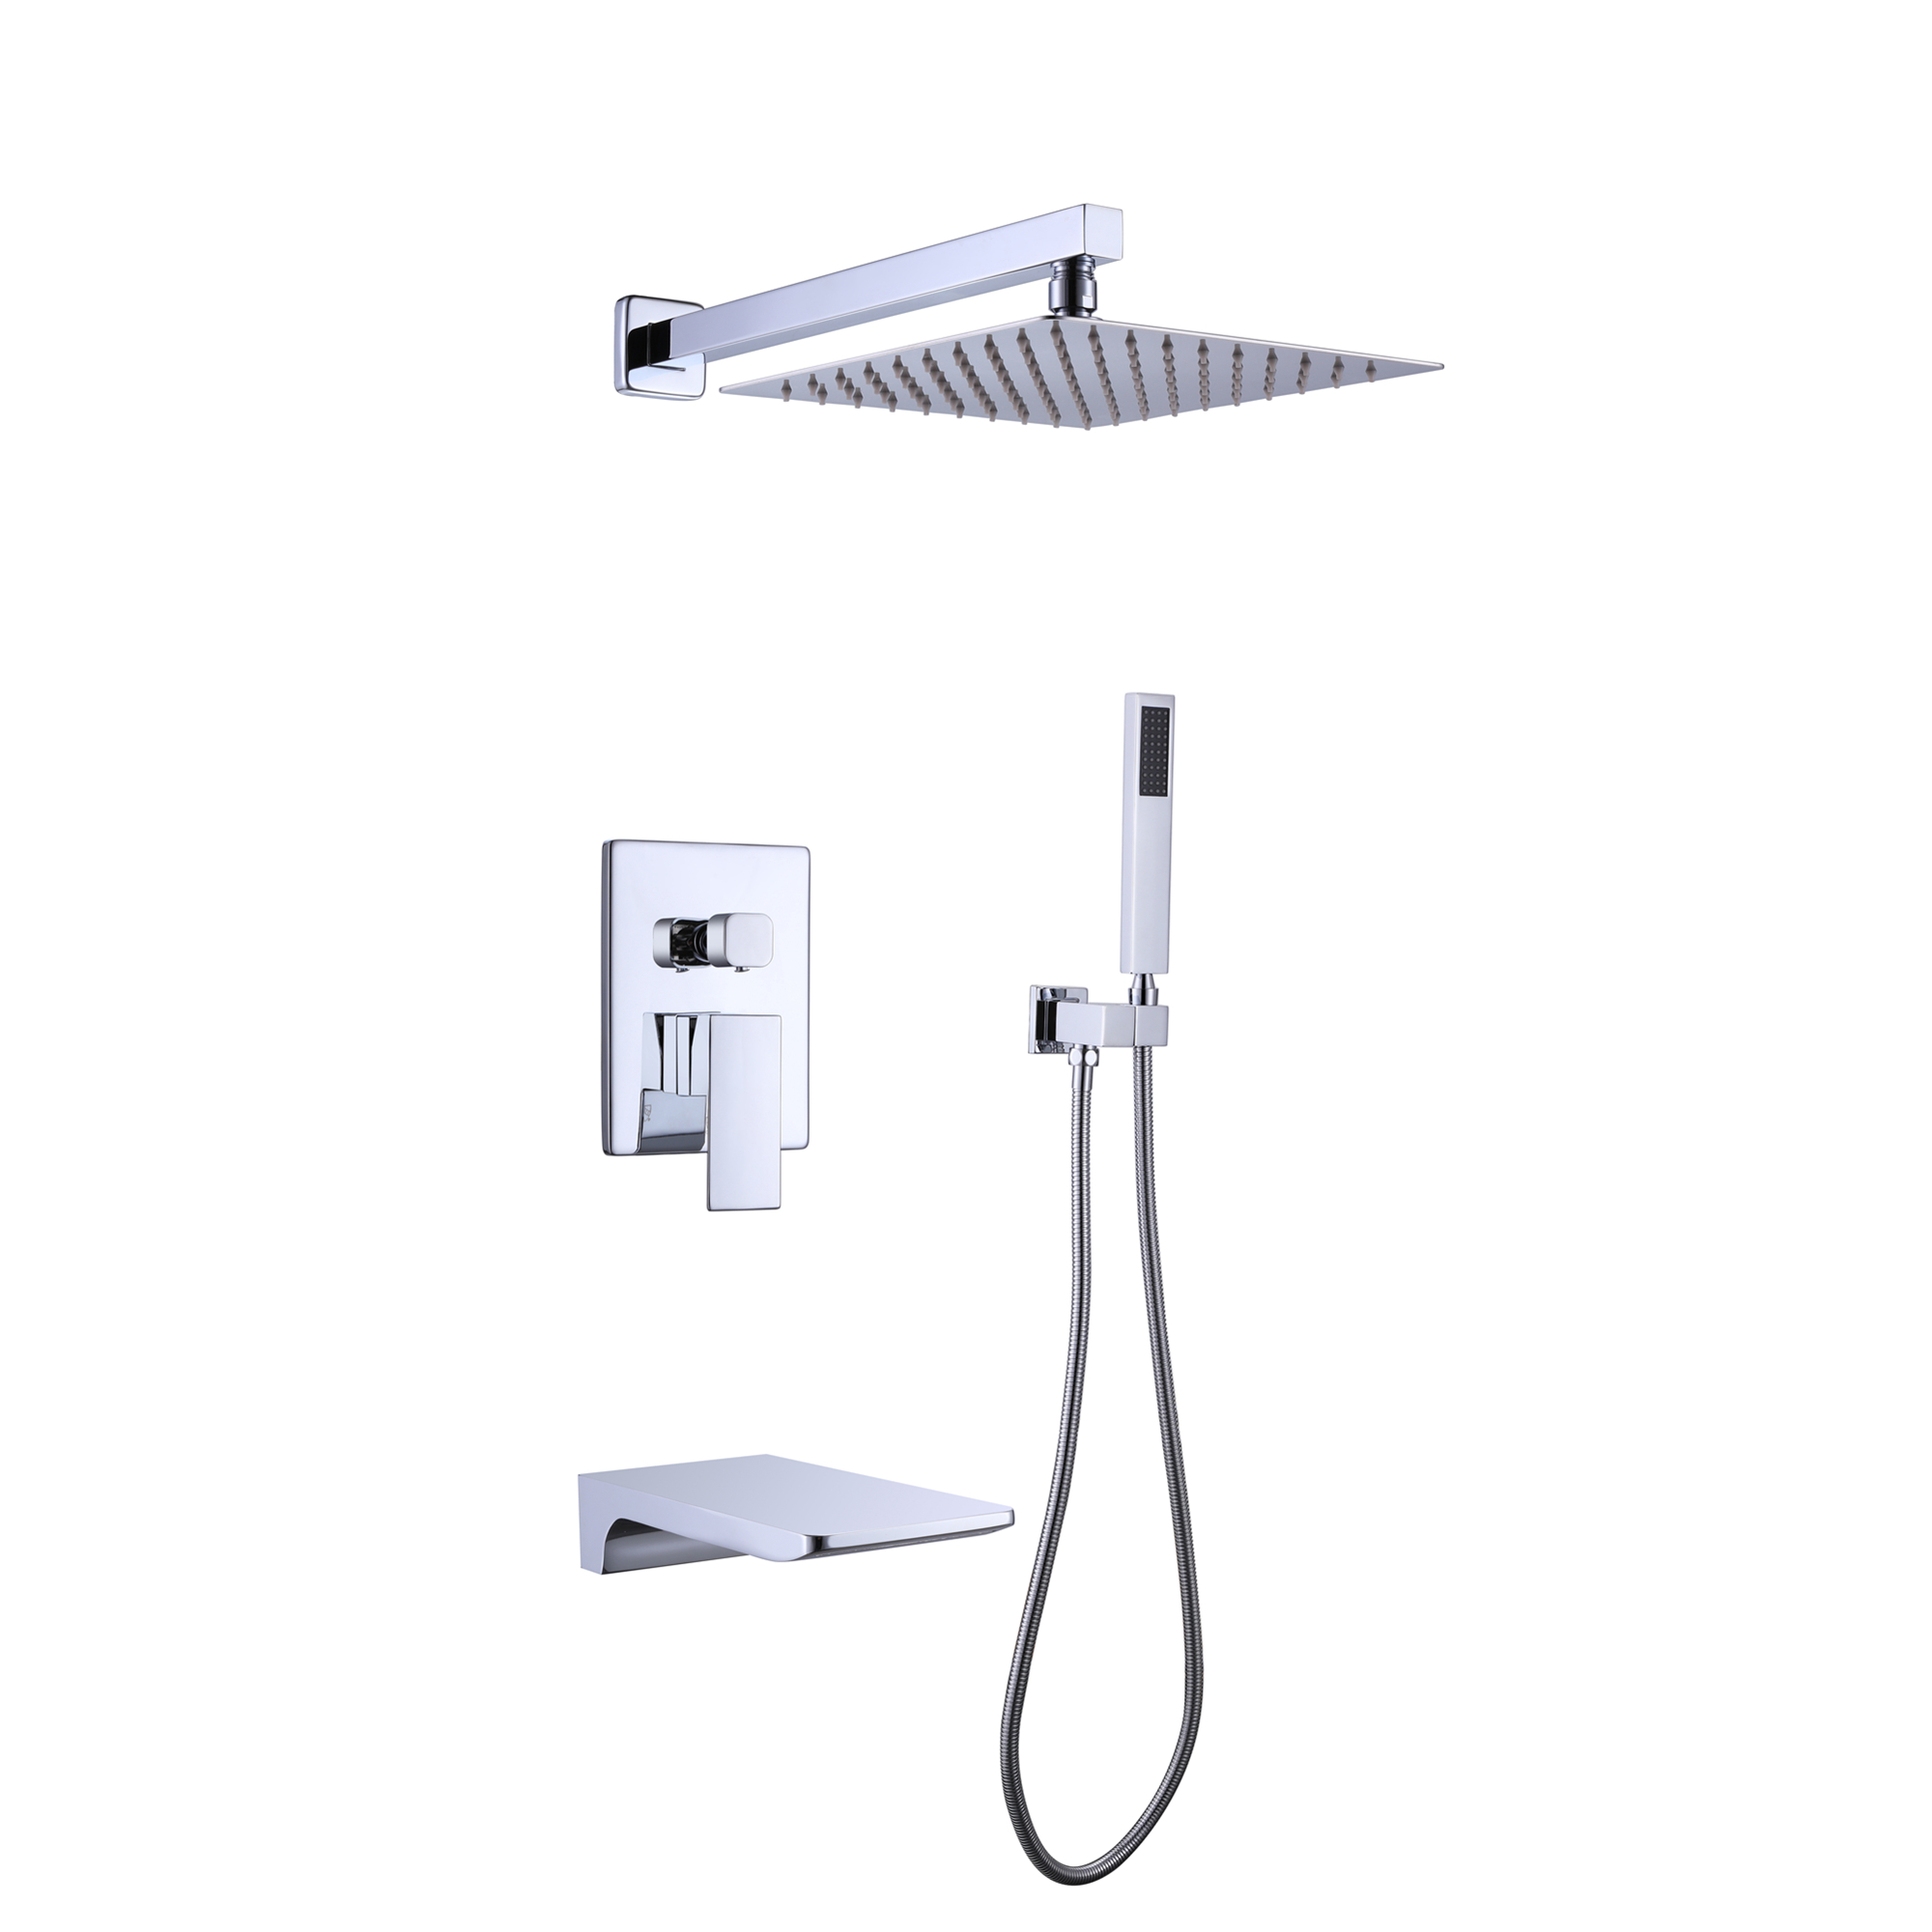 Trustmade Wall Mounted Square Rainfall Pressure Balanced Complteted Shower System with Rough-in Valve, 3 Function, 10 inches Chrome - 3W02-CASAINC